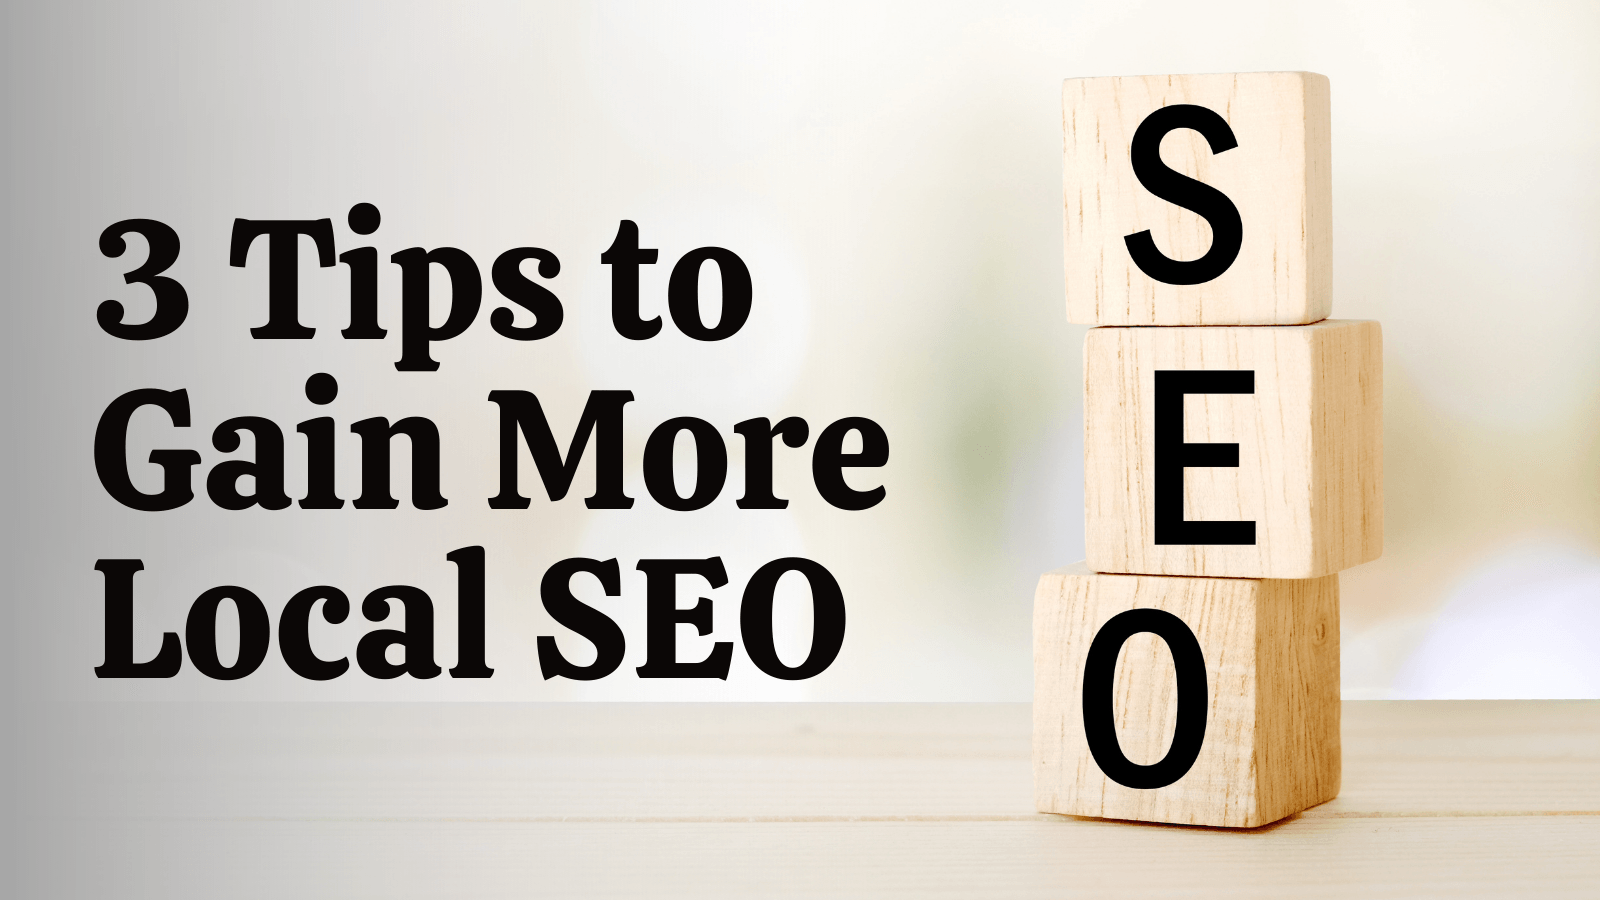 3 Tips to Gain More Local SEO